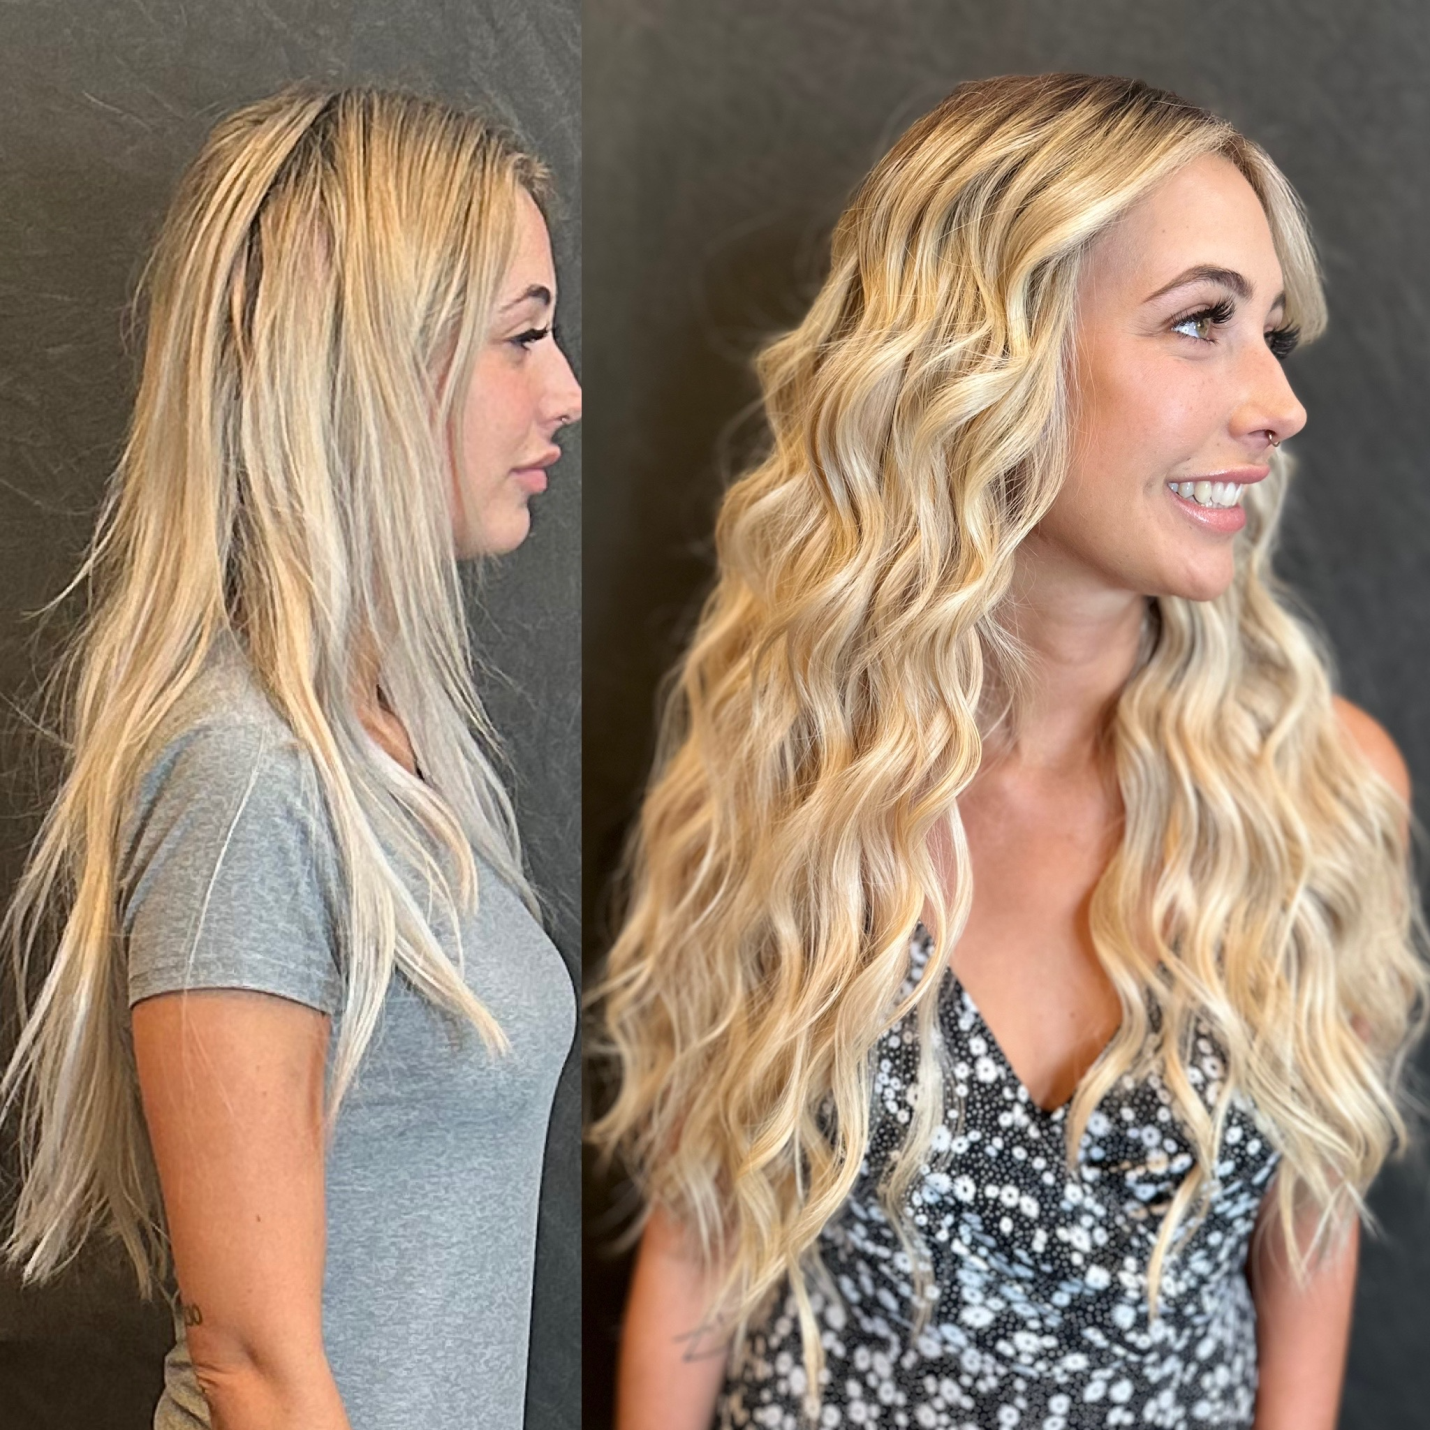 The image shows hair transformation through extensions